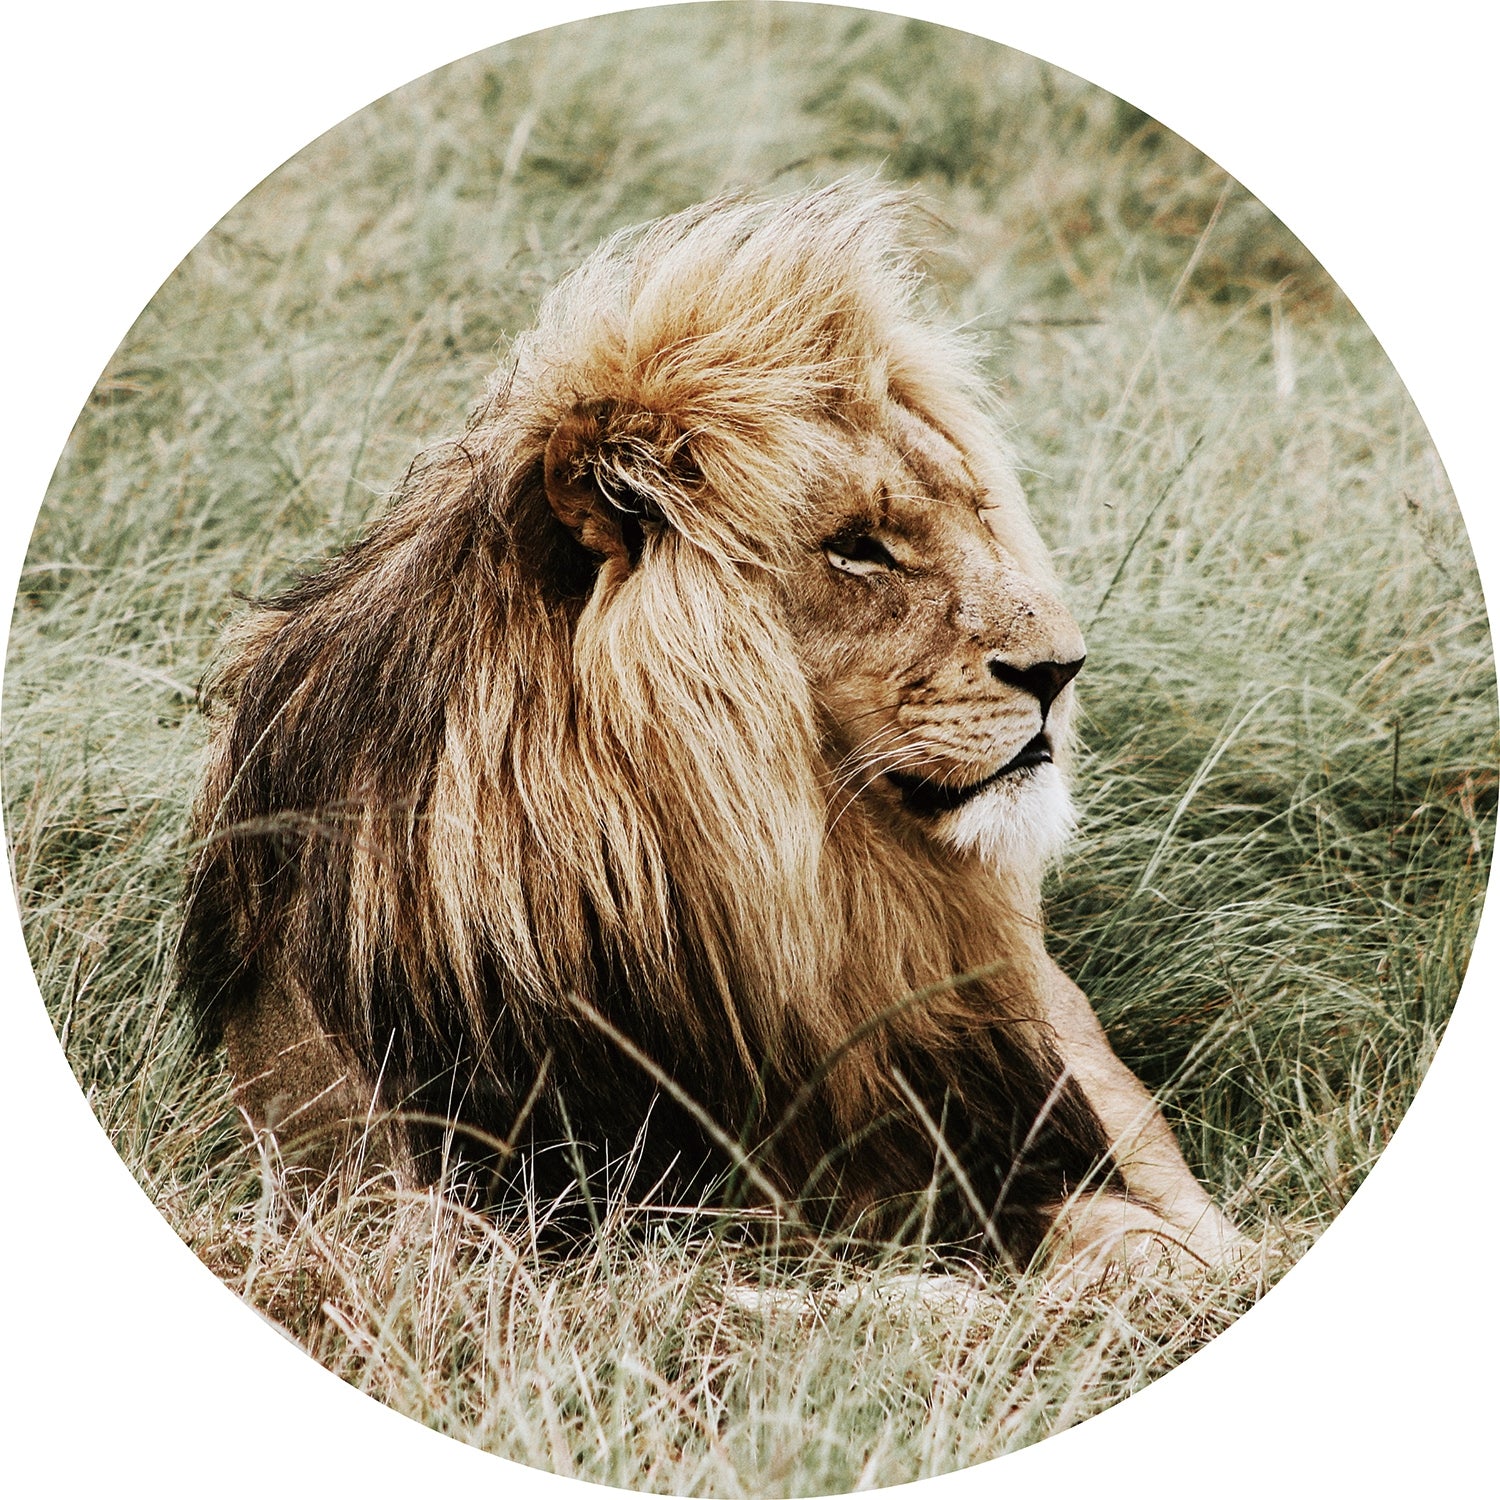 Resting lion - Round glass painting